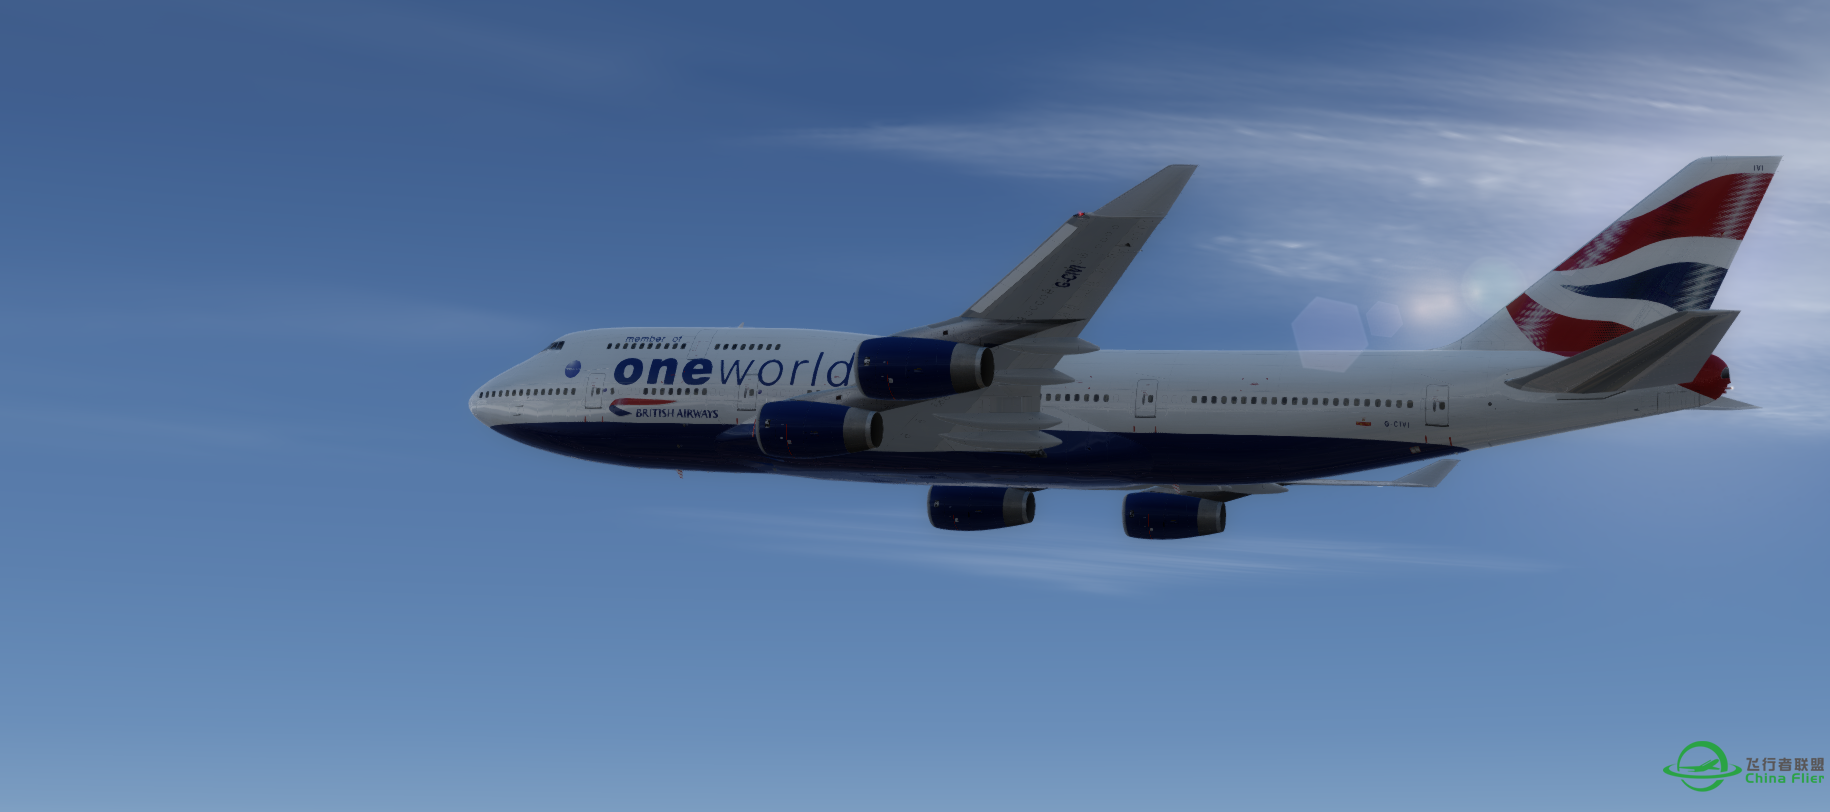 Boeing747-400 from Washington to new York-9876 